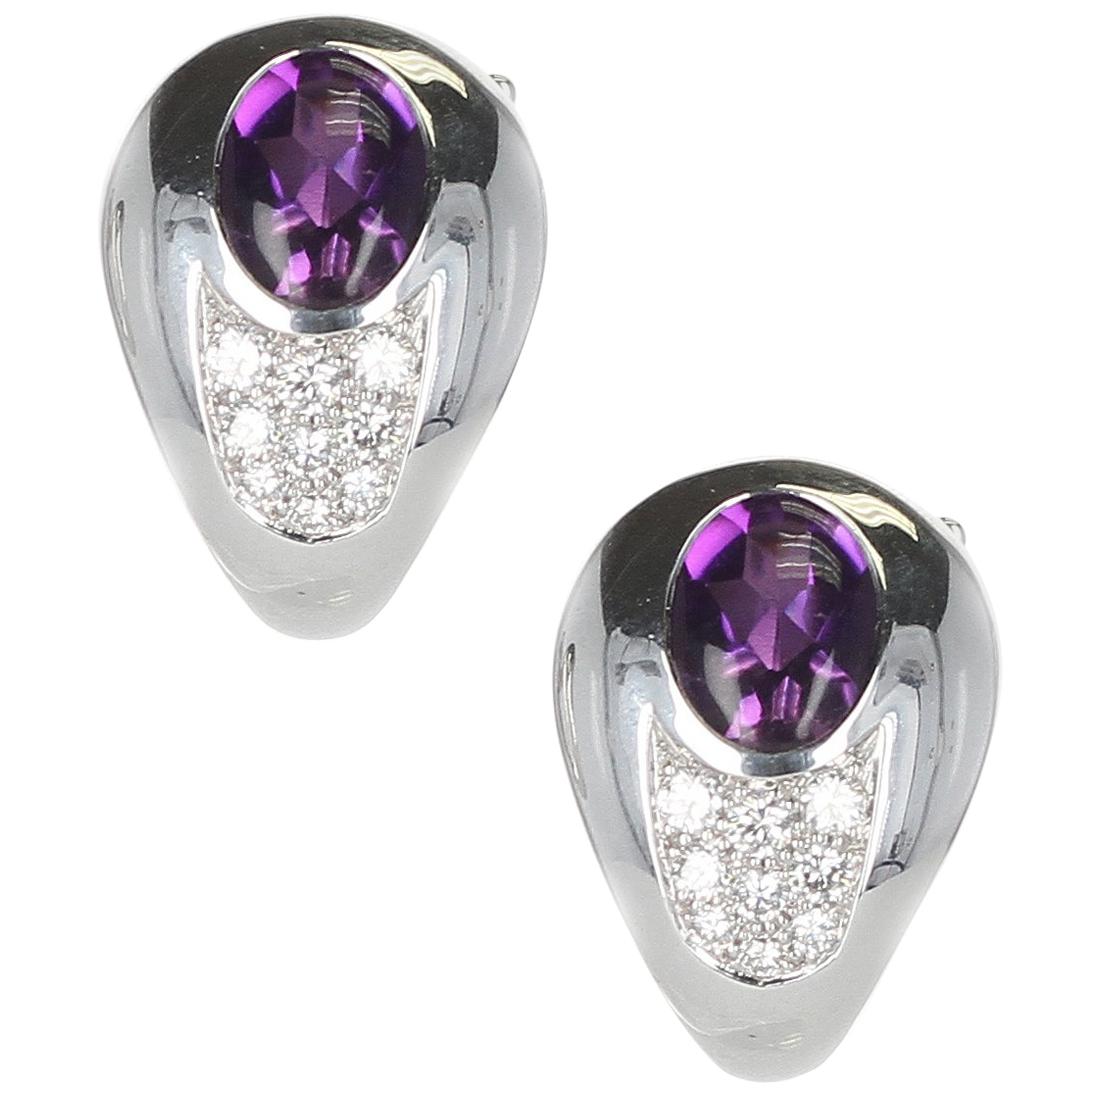 A pair of Mauboussin Amethyst and Diamond Earrings made in 18 Karat Yellow Gold. The total weight of the earrings is 17.35 grams. The amethyst weighs 2.20 carats and the diamonds weigh 0.42 carats. The earrings are clip-ons.  


